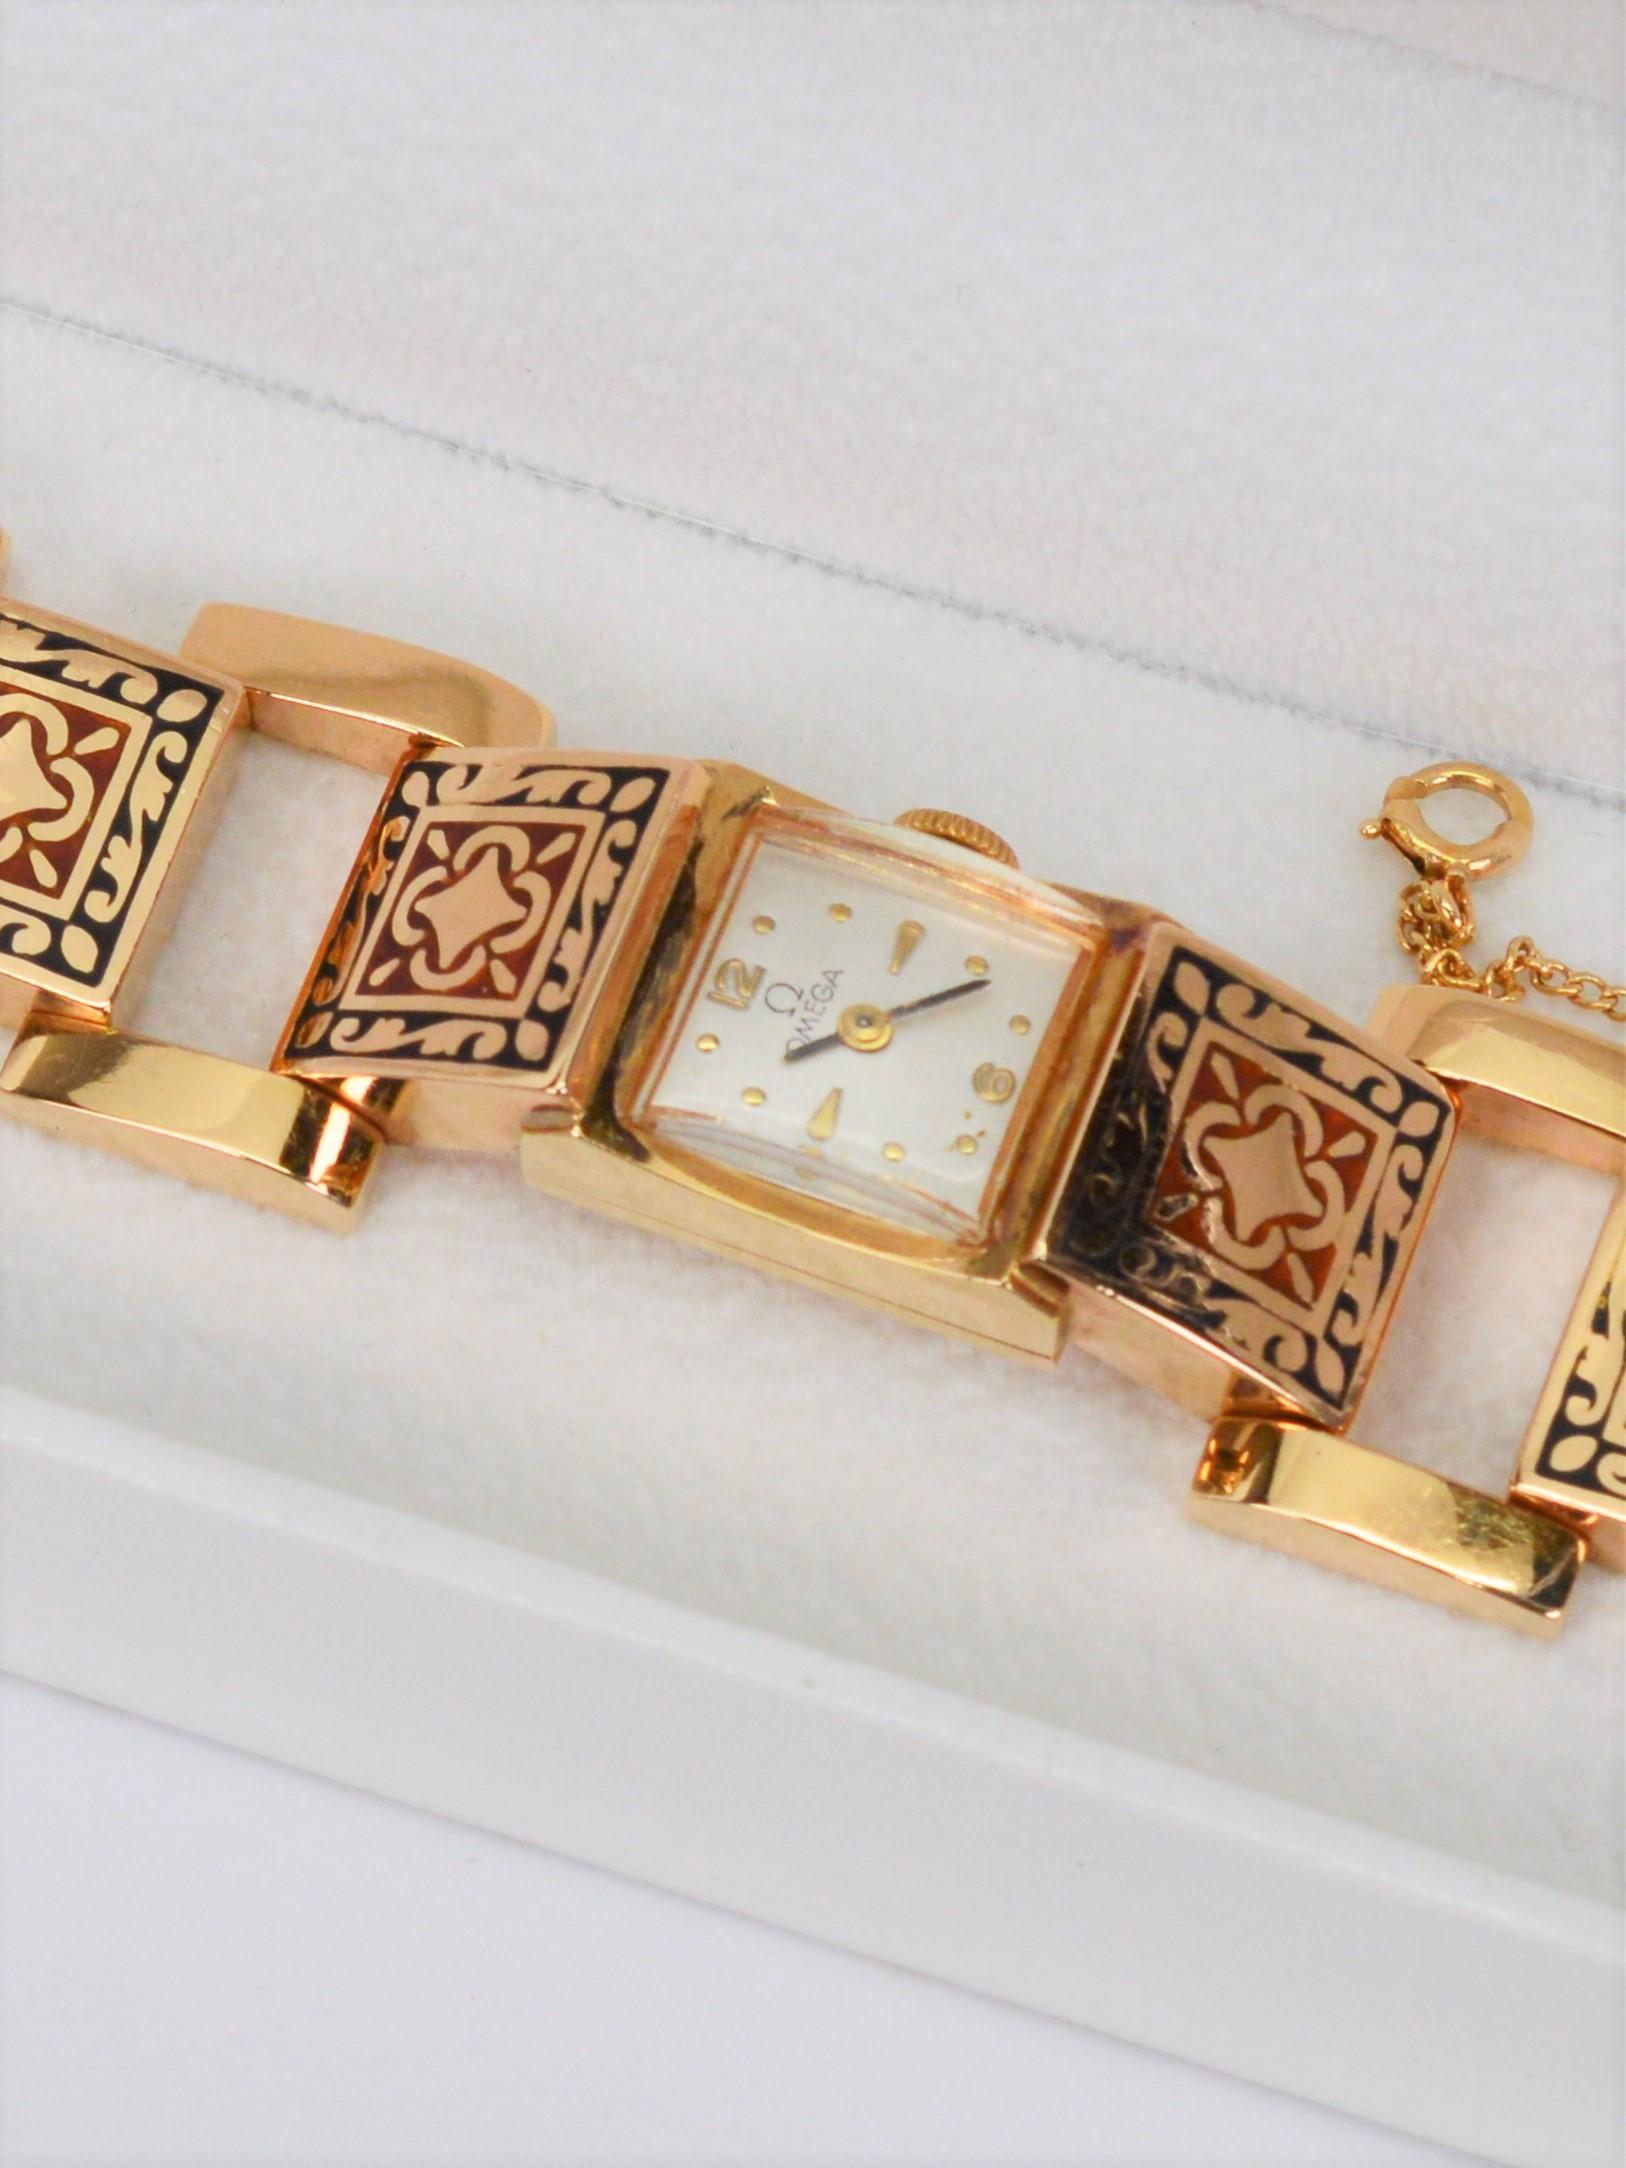 Ladies Omega Red and Black Cloisonne 14 Karat Yellow Gold Link Bracelet Watch In Excellent Condition For Sale In Mount Kisco, NY